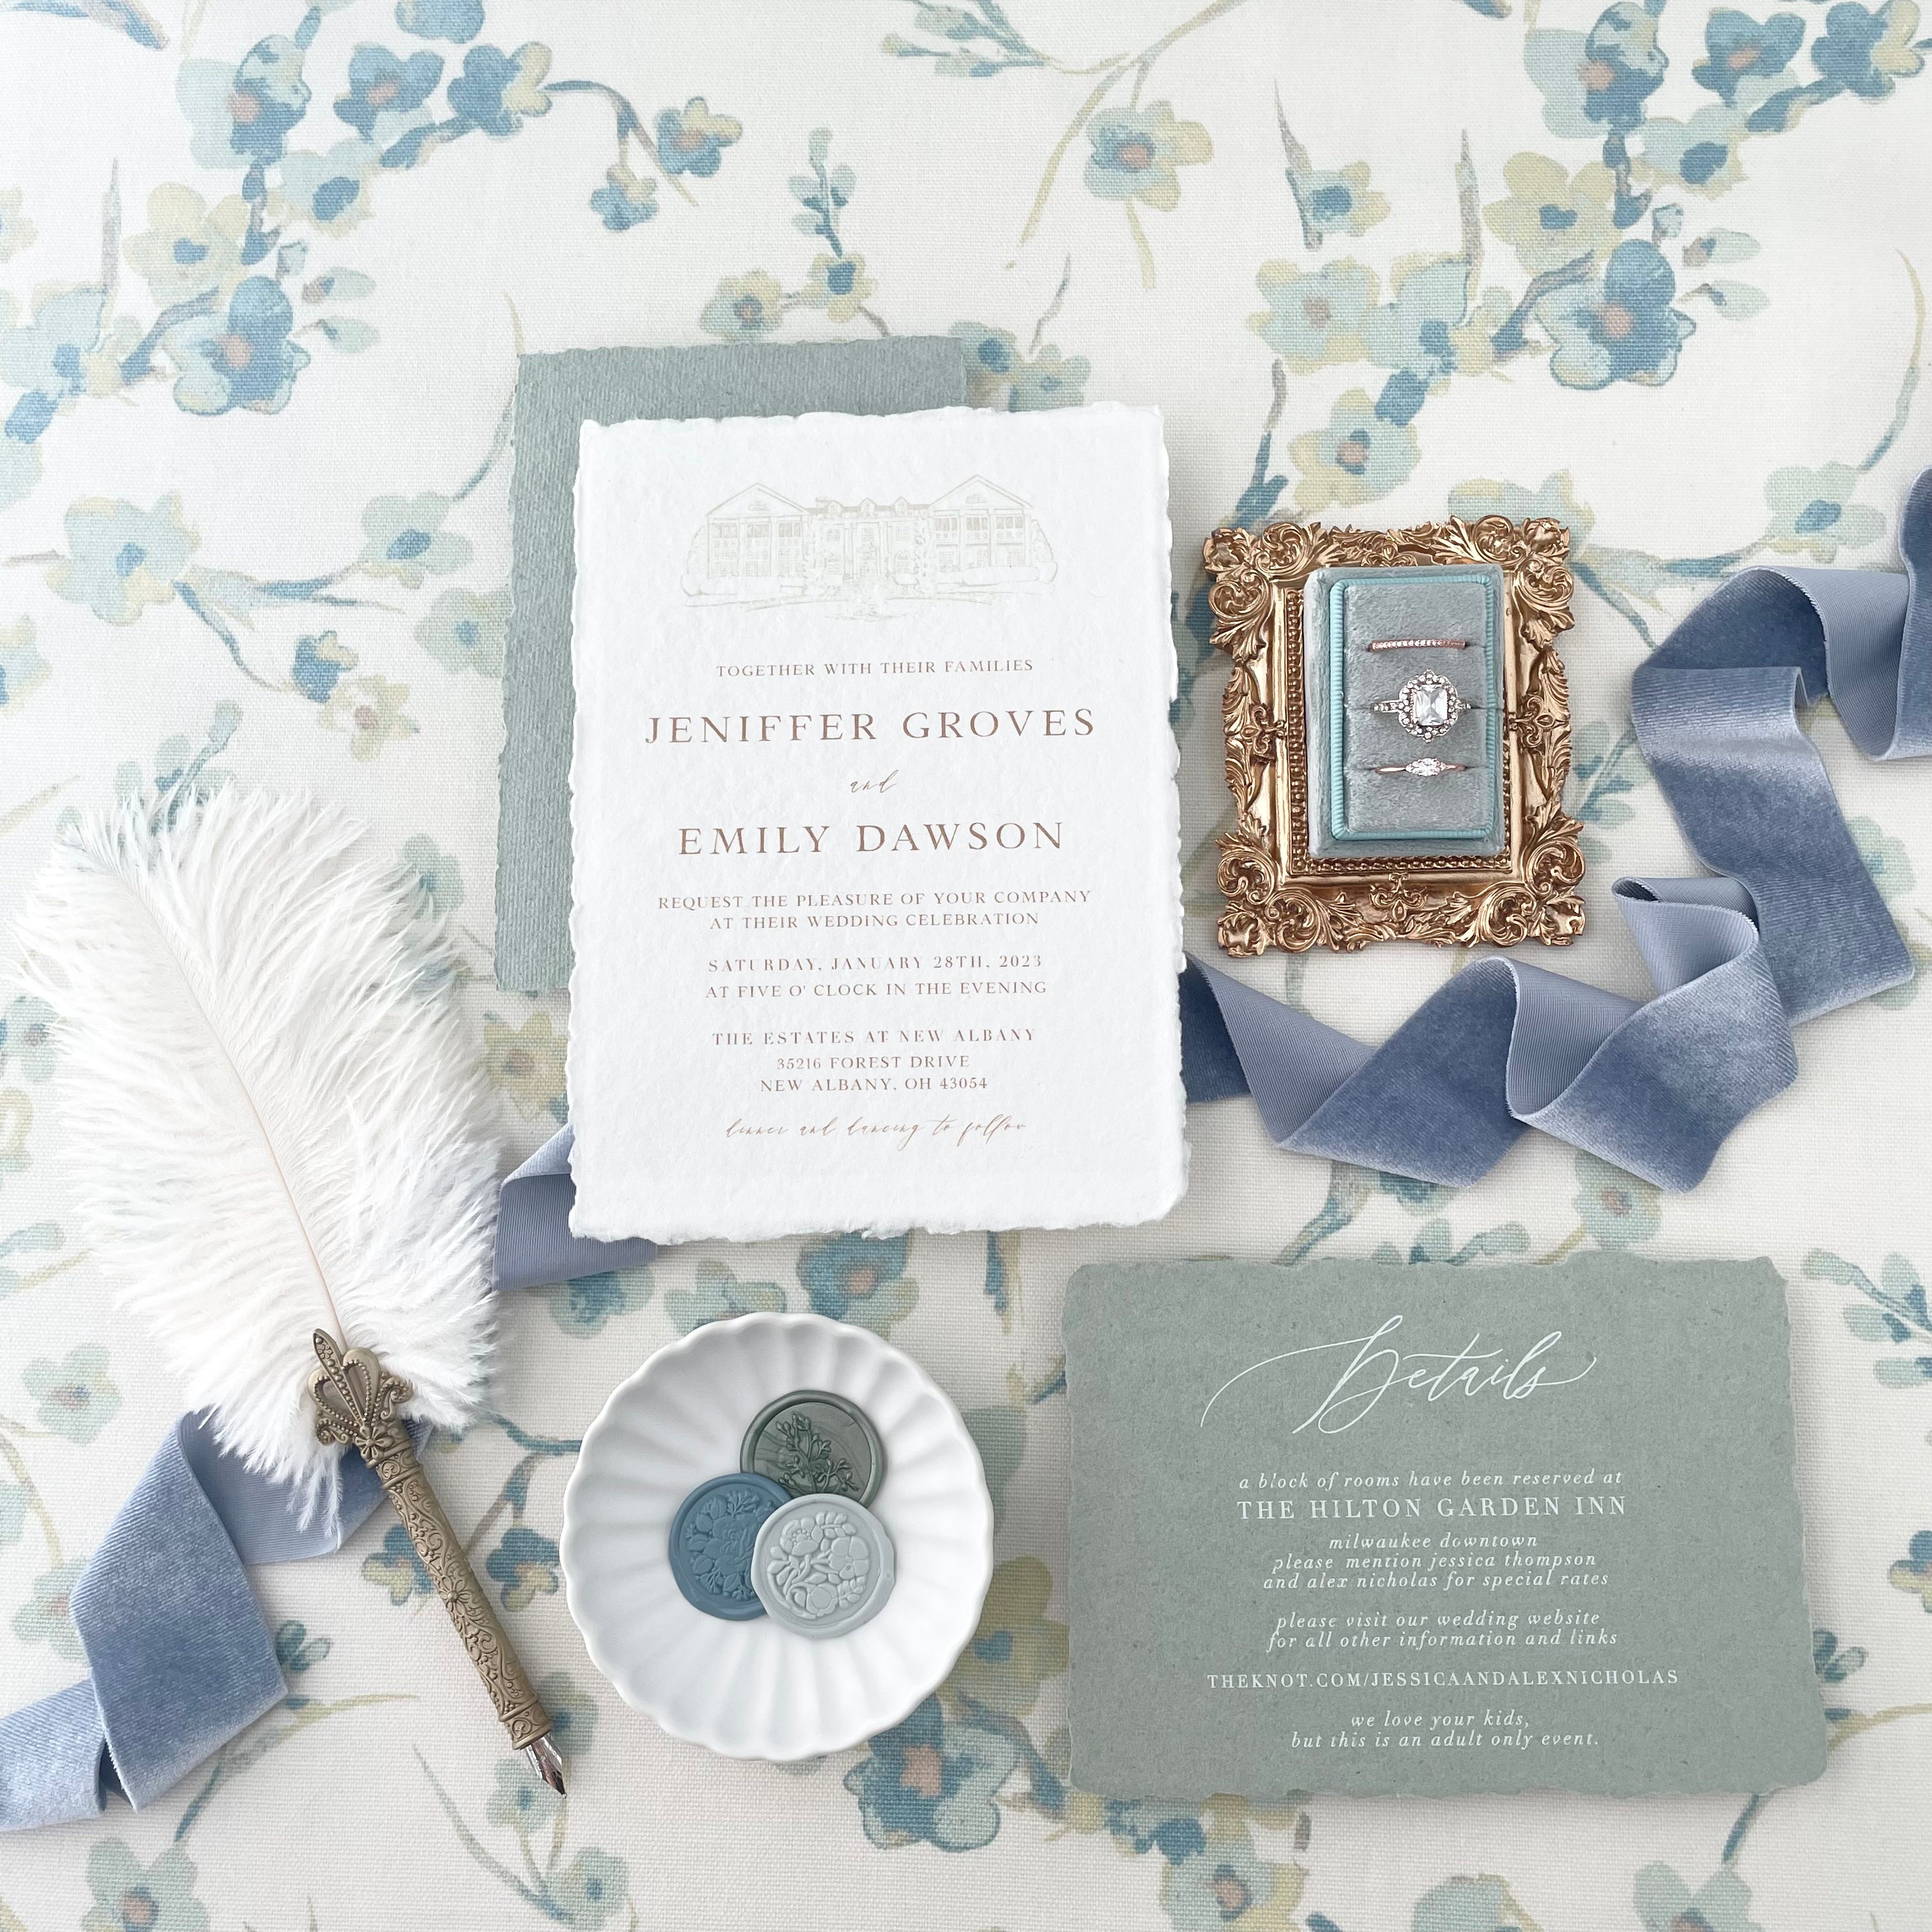 Vintage feather pen and sage green and white wedding invitation styled with dusty blue ring box on gold tray, dusty blue ribbon, and 3 wax seals on Matte white scalloped dish  - wedding flat lay props from Champagne & GRIT